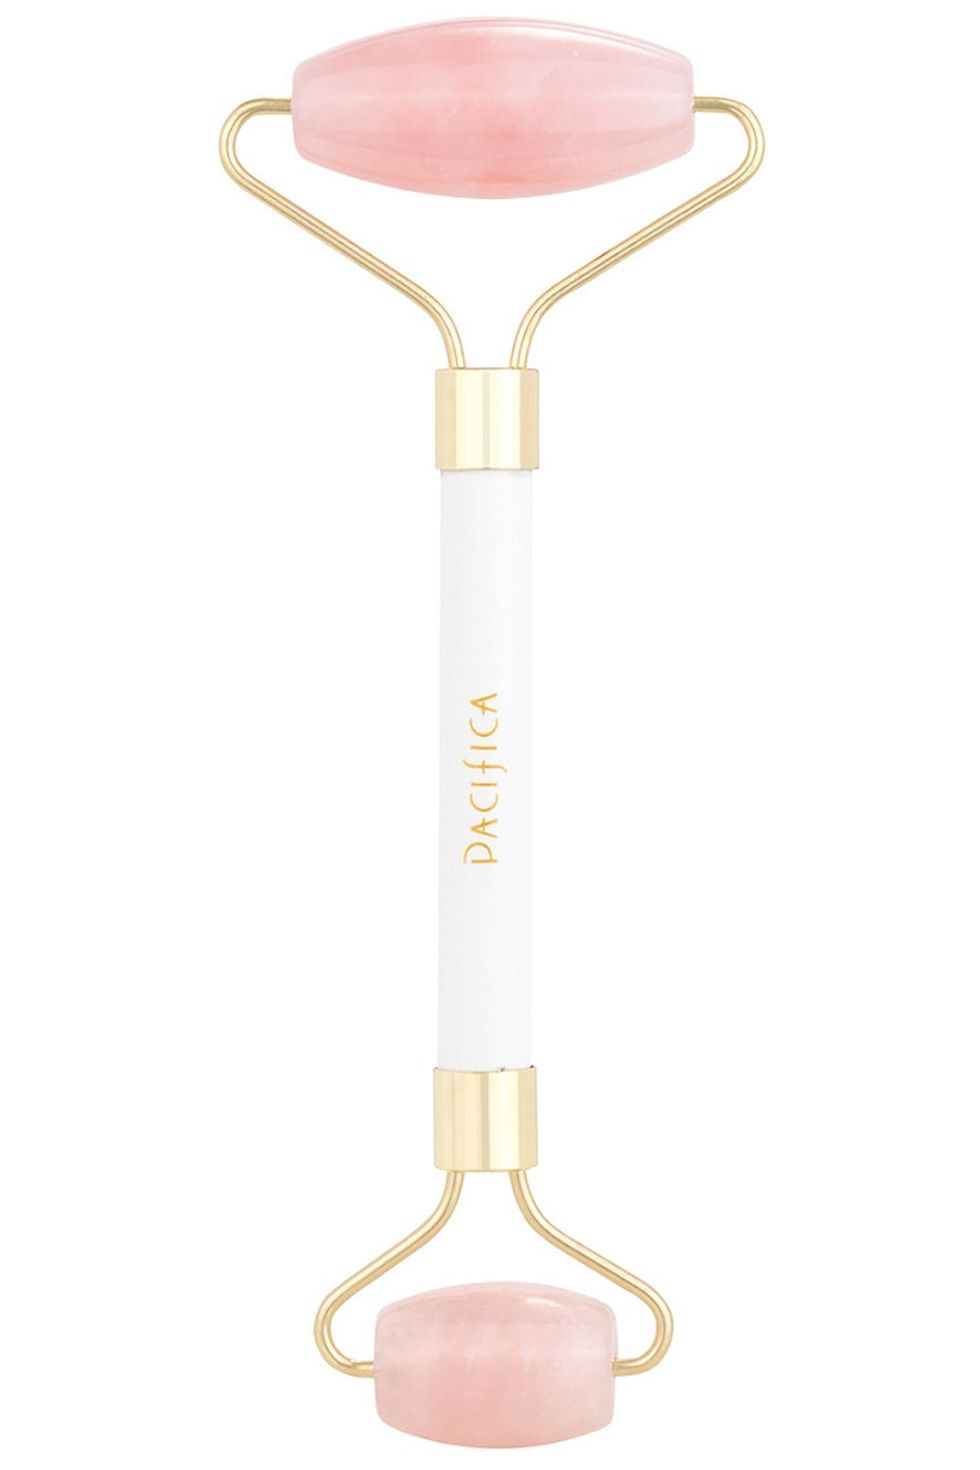 Pacifica Crystal Wand Secret Weapon Facial Roller